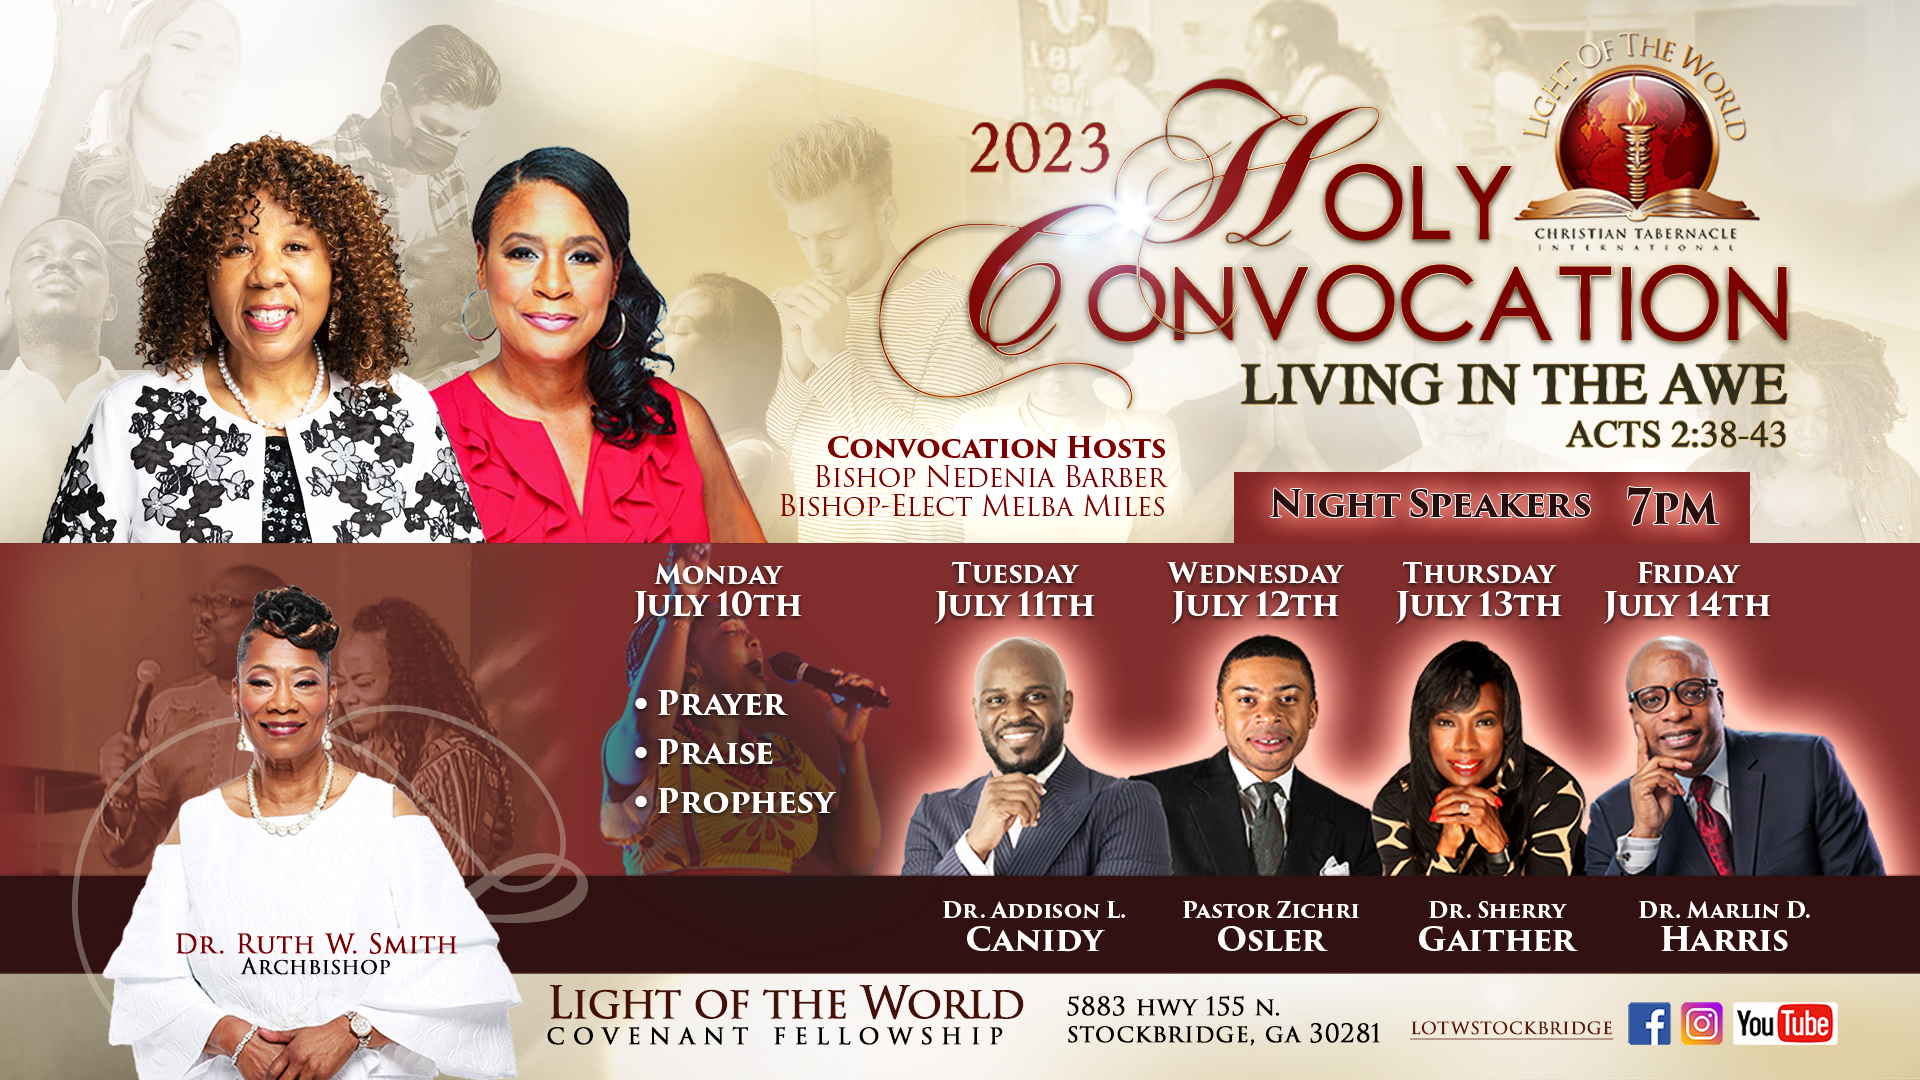 2023 Holy Convocation Night Speakers flyer